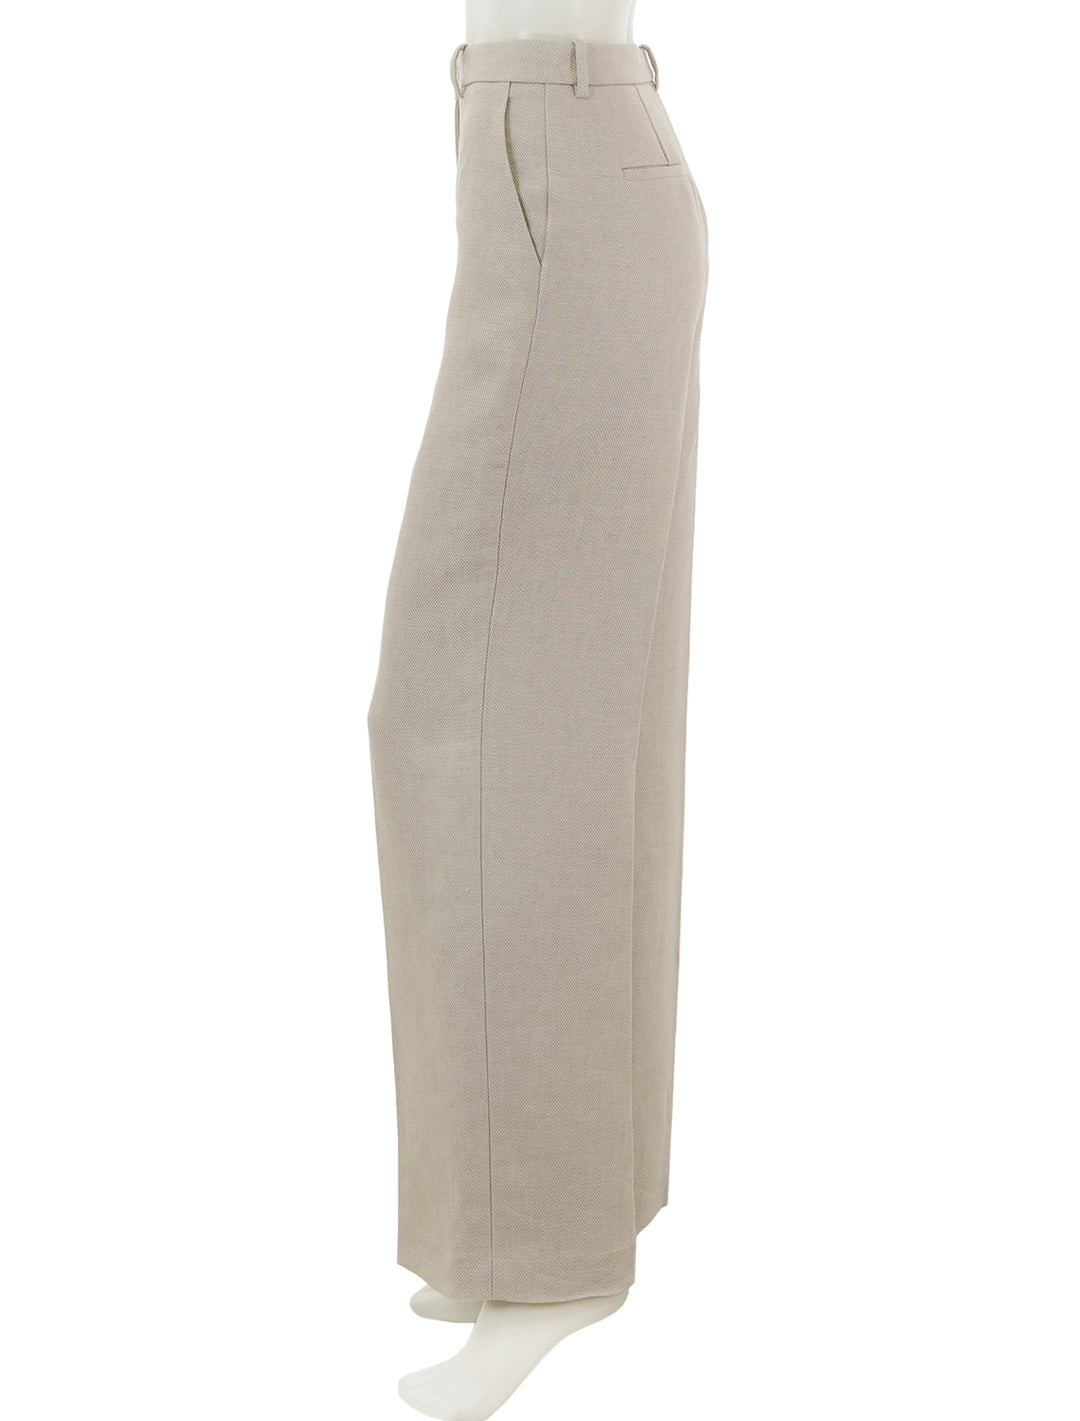 Side view of Theory's clean trouser in straw basketweave linen.